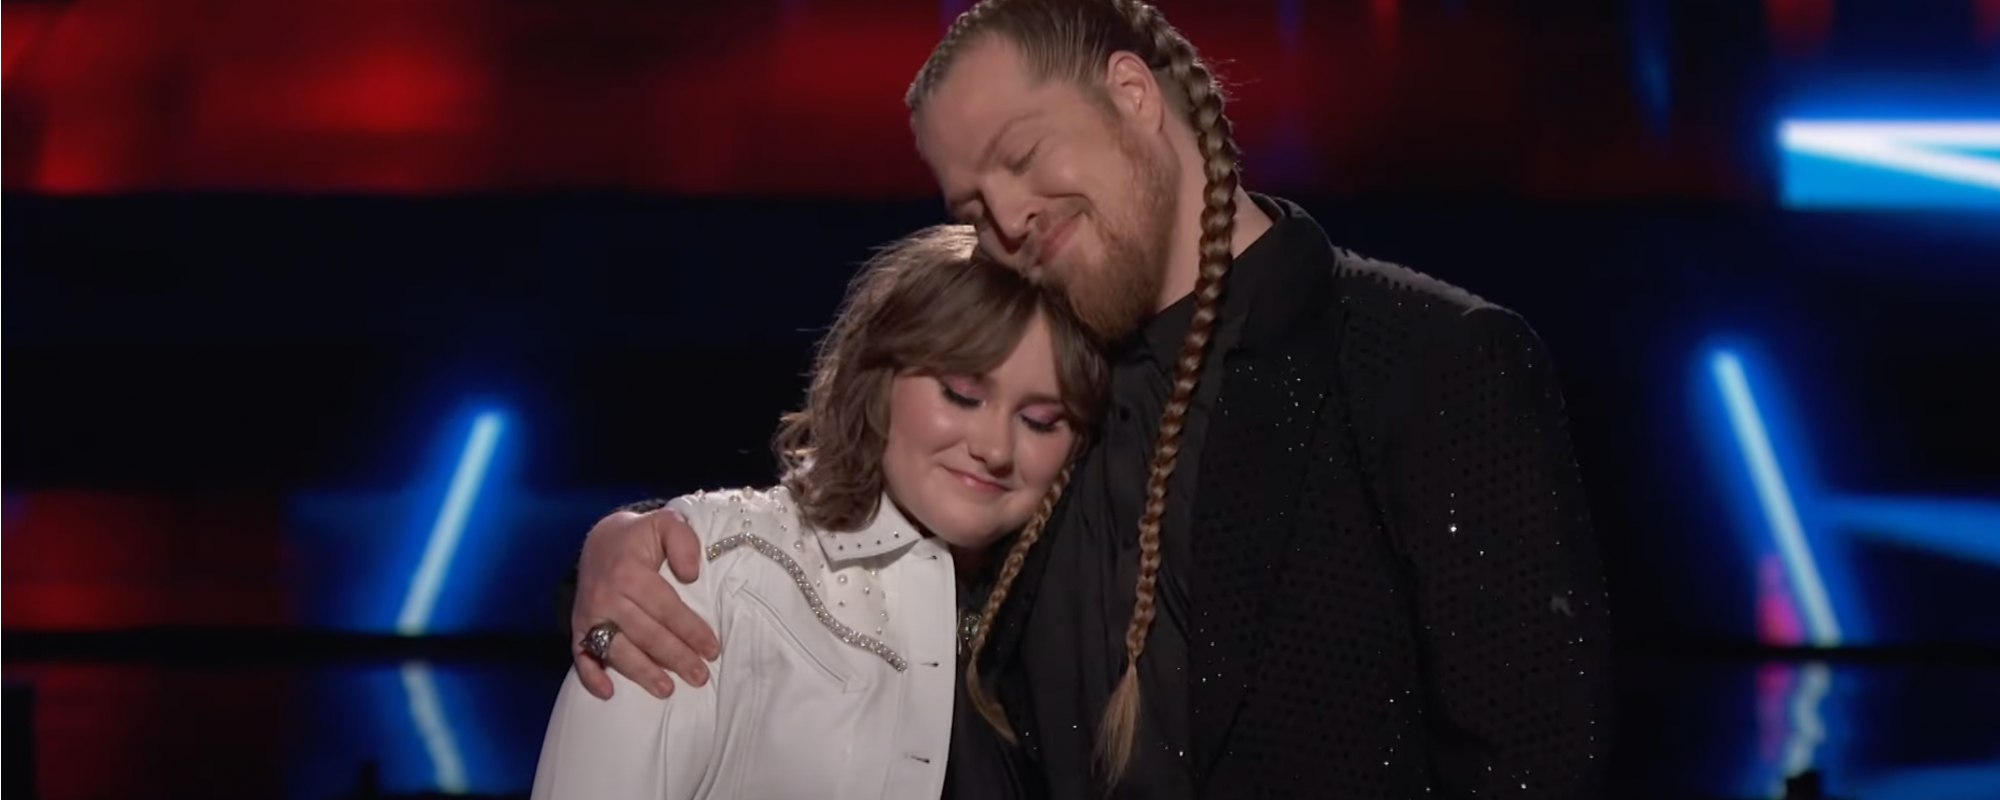 ‘The Voice’ Winner Huntley Reveals Genuine Thoughts on Defeating Ruby Leigh in Finale